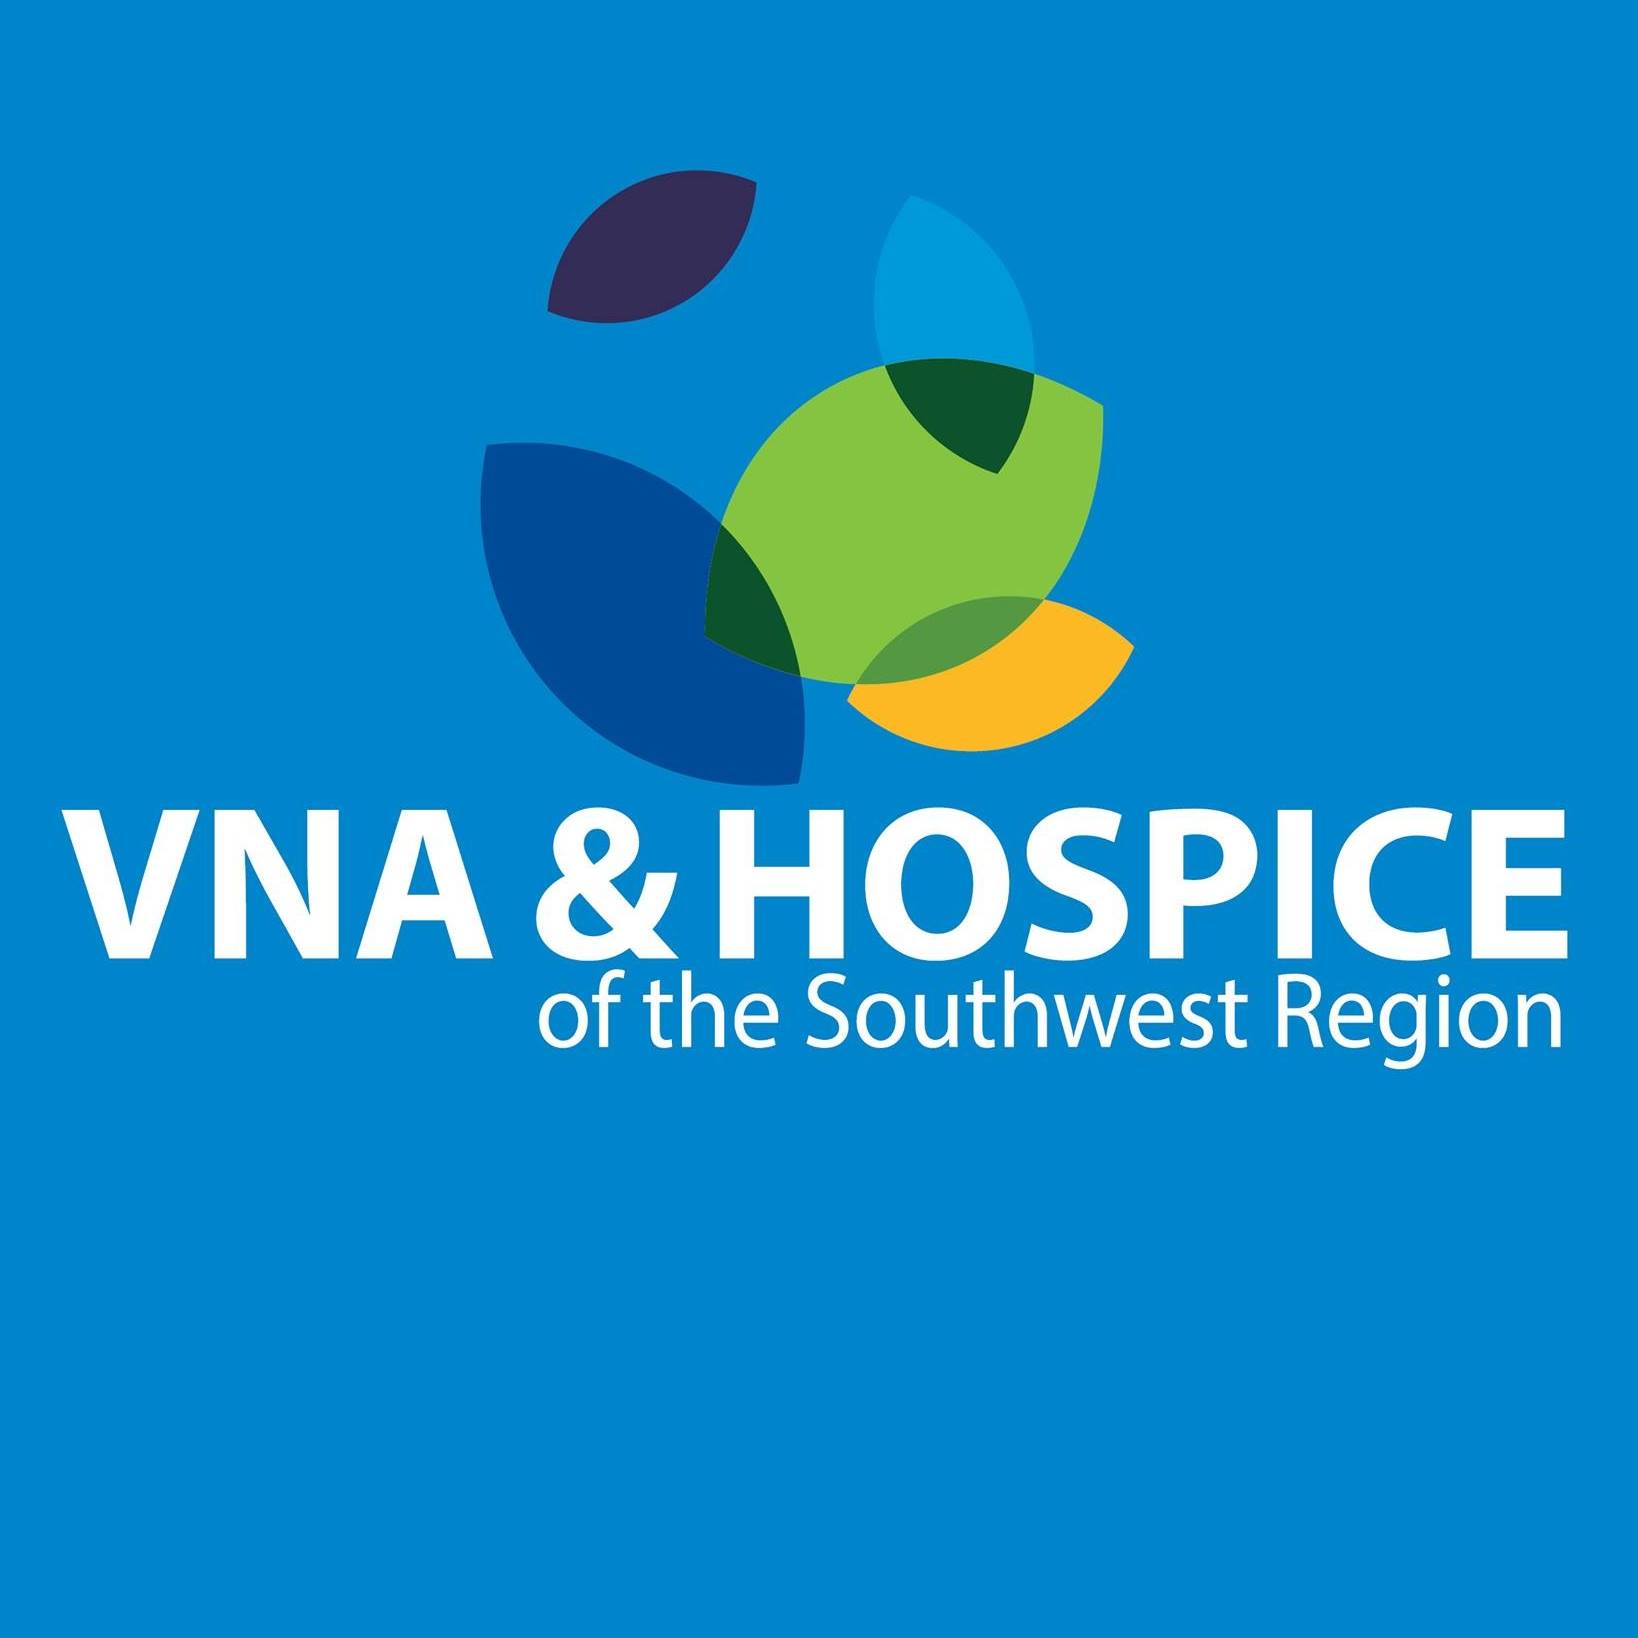 VNA and Hospice of the Southwest Region